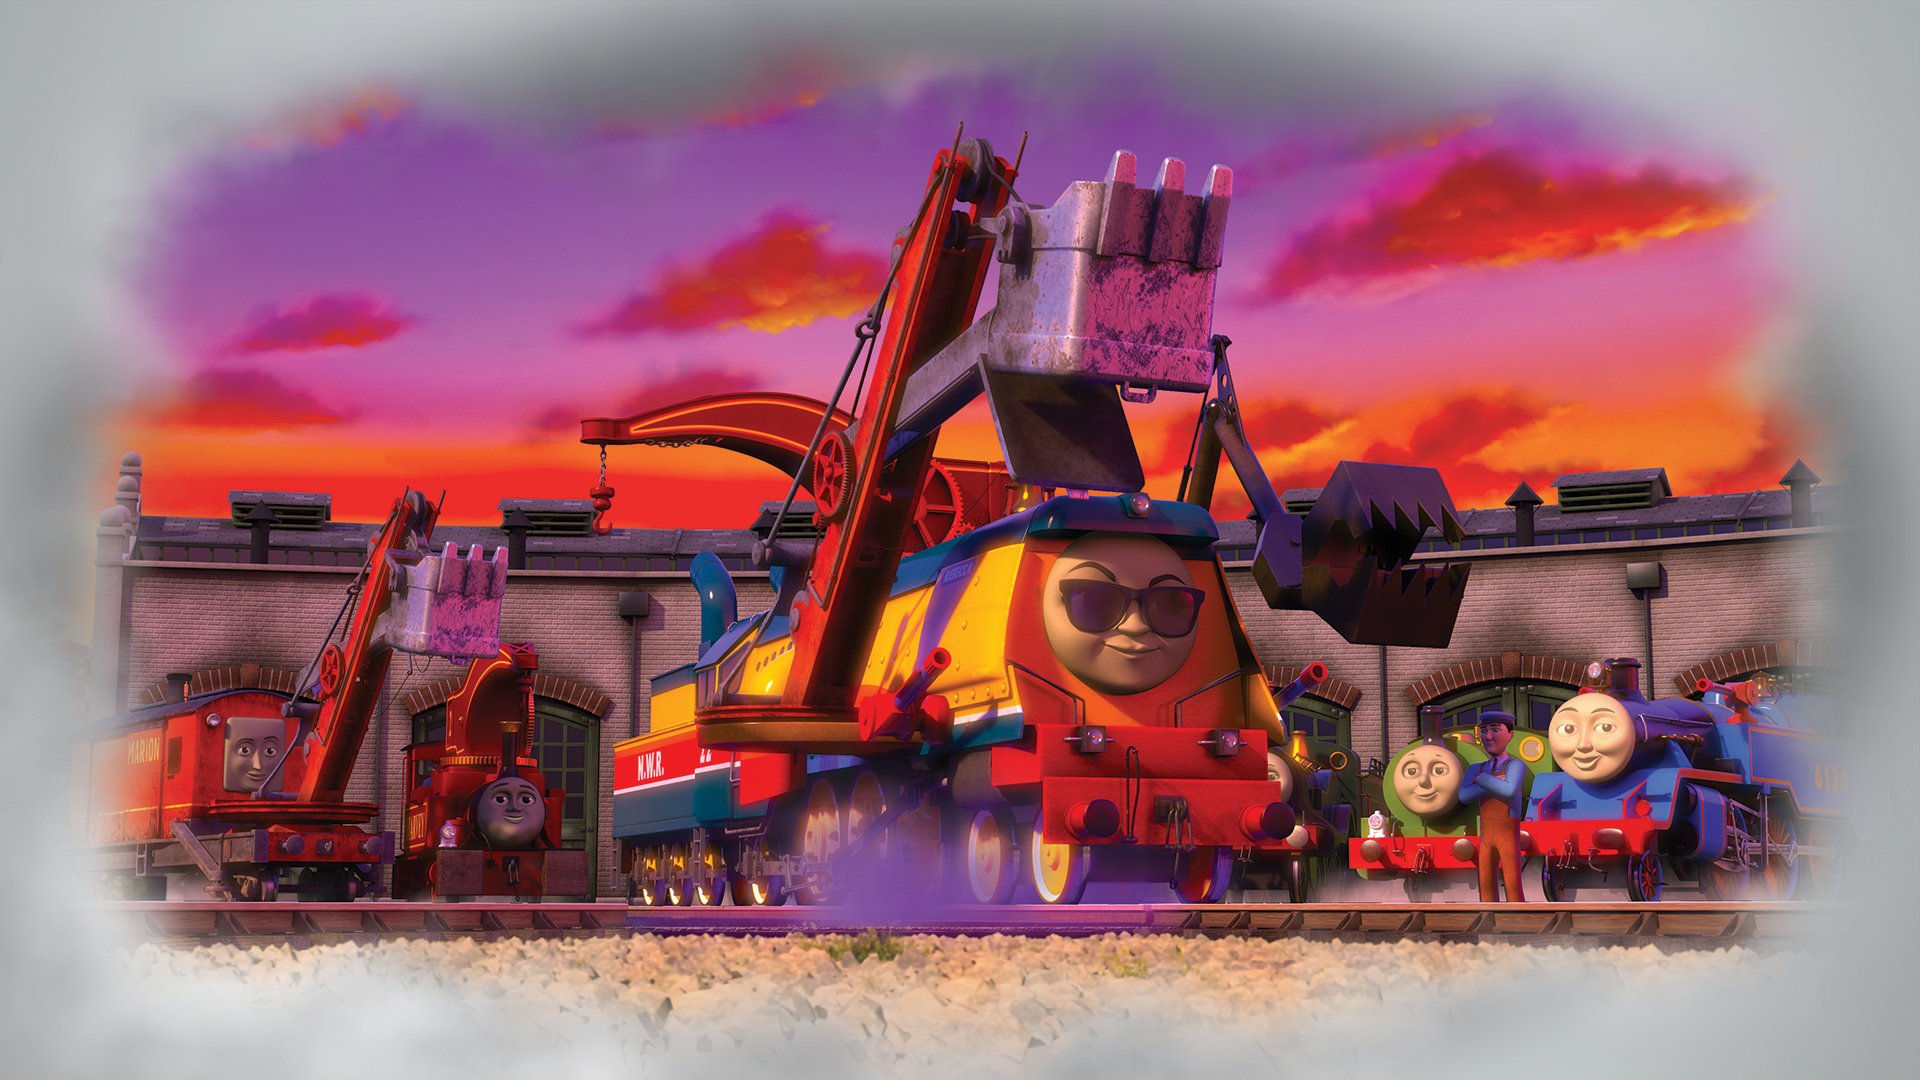 What Rebecca Does Thomas The Tank Engine Wikia Fandom Images, Photos, Reviews